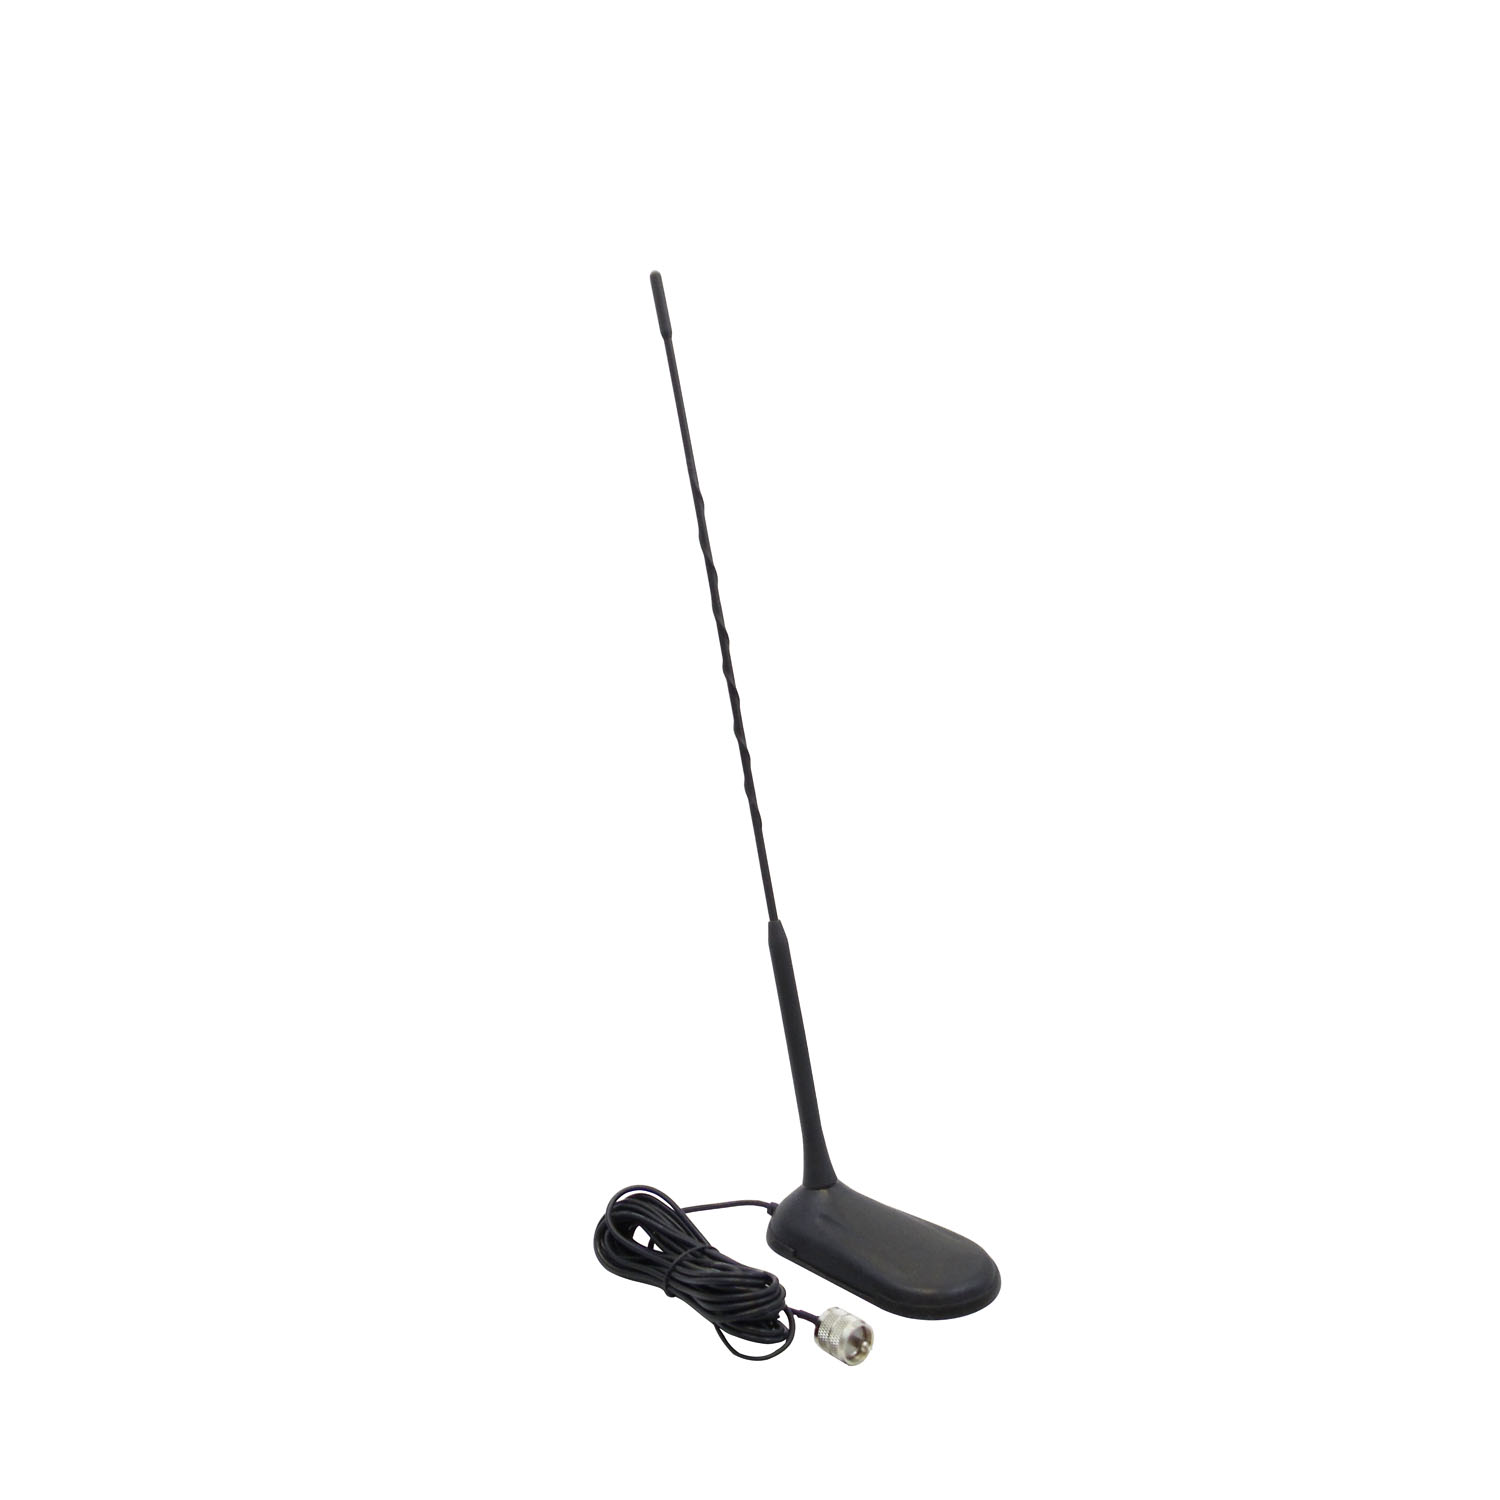 Kalibur - KMAG2 18" Tall Low Profile Magnetic Mount Cb Antenna With Built-In Shock Spring, 18' Coax Cable & Connector